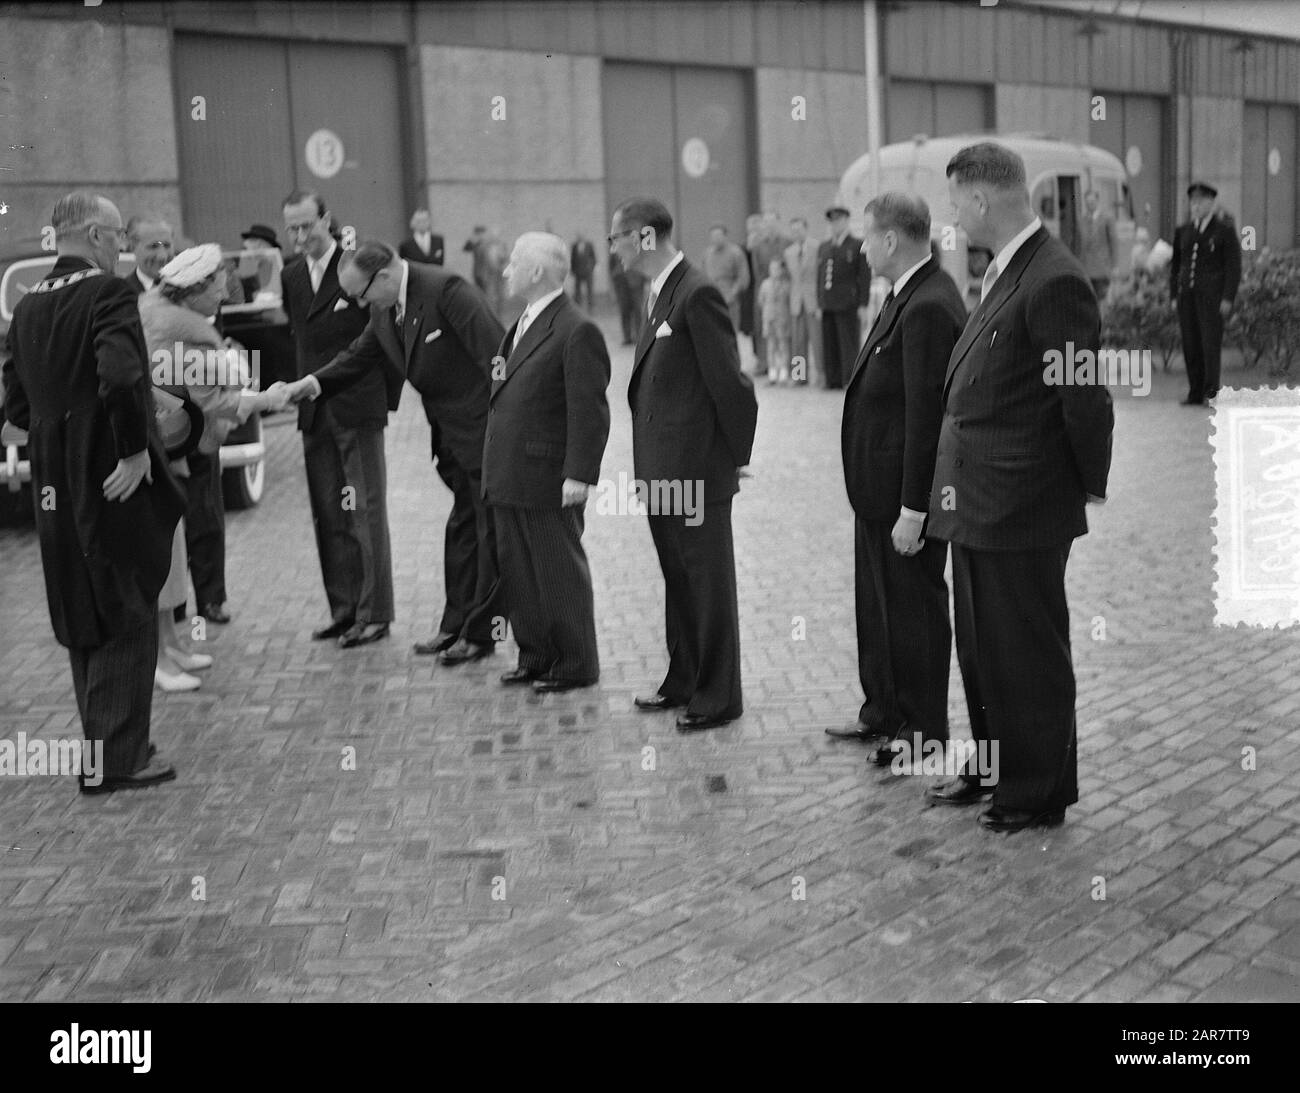 queen Juliana visits Rotterdam, Havenvakschool (N. V. Thomsens)/glasnegatife Date: 31 May 1954 Location: Rotterdam, Zuid-Holland Keywords: visits, queens Personal name: Juliana (queen Netherlands) Institution name: NV Thomsens Stock Photo